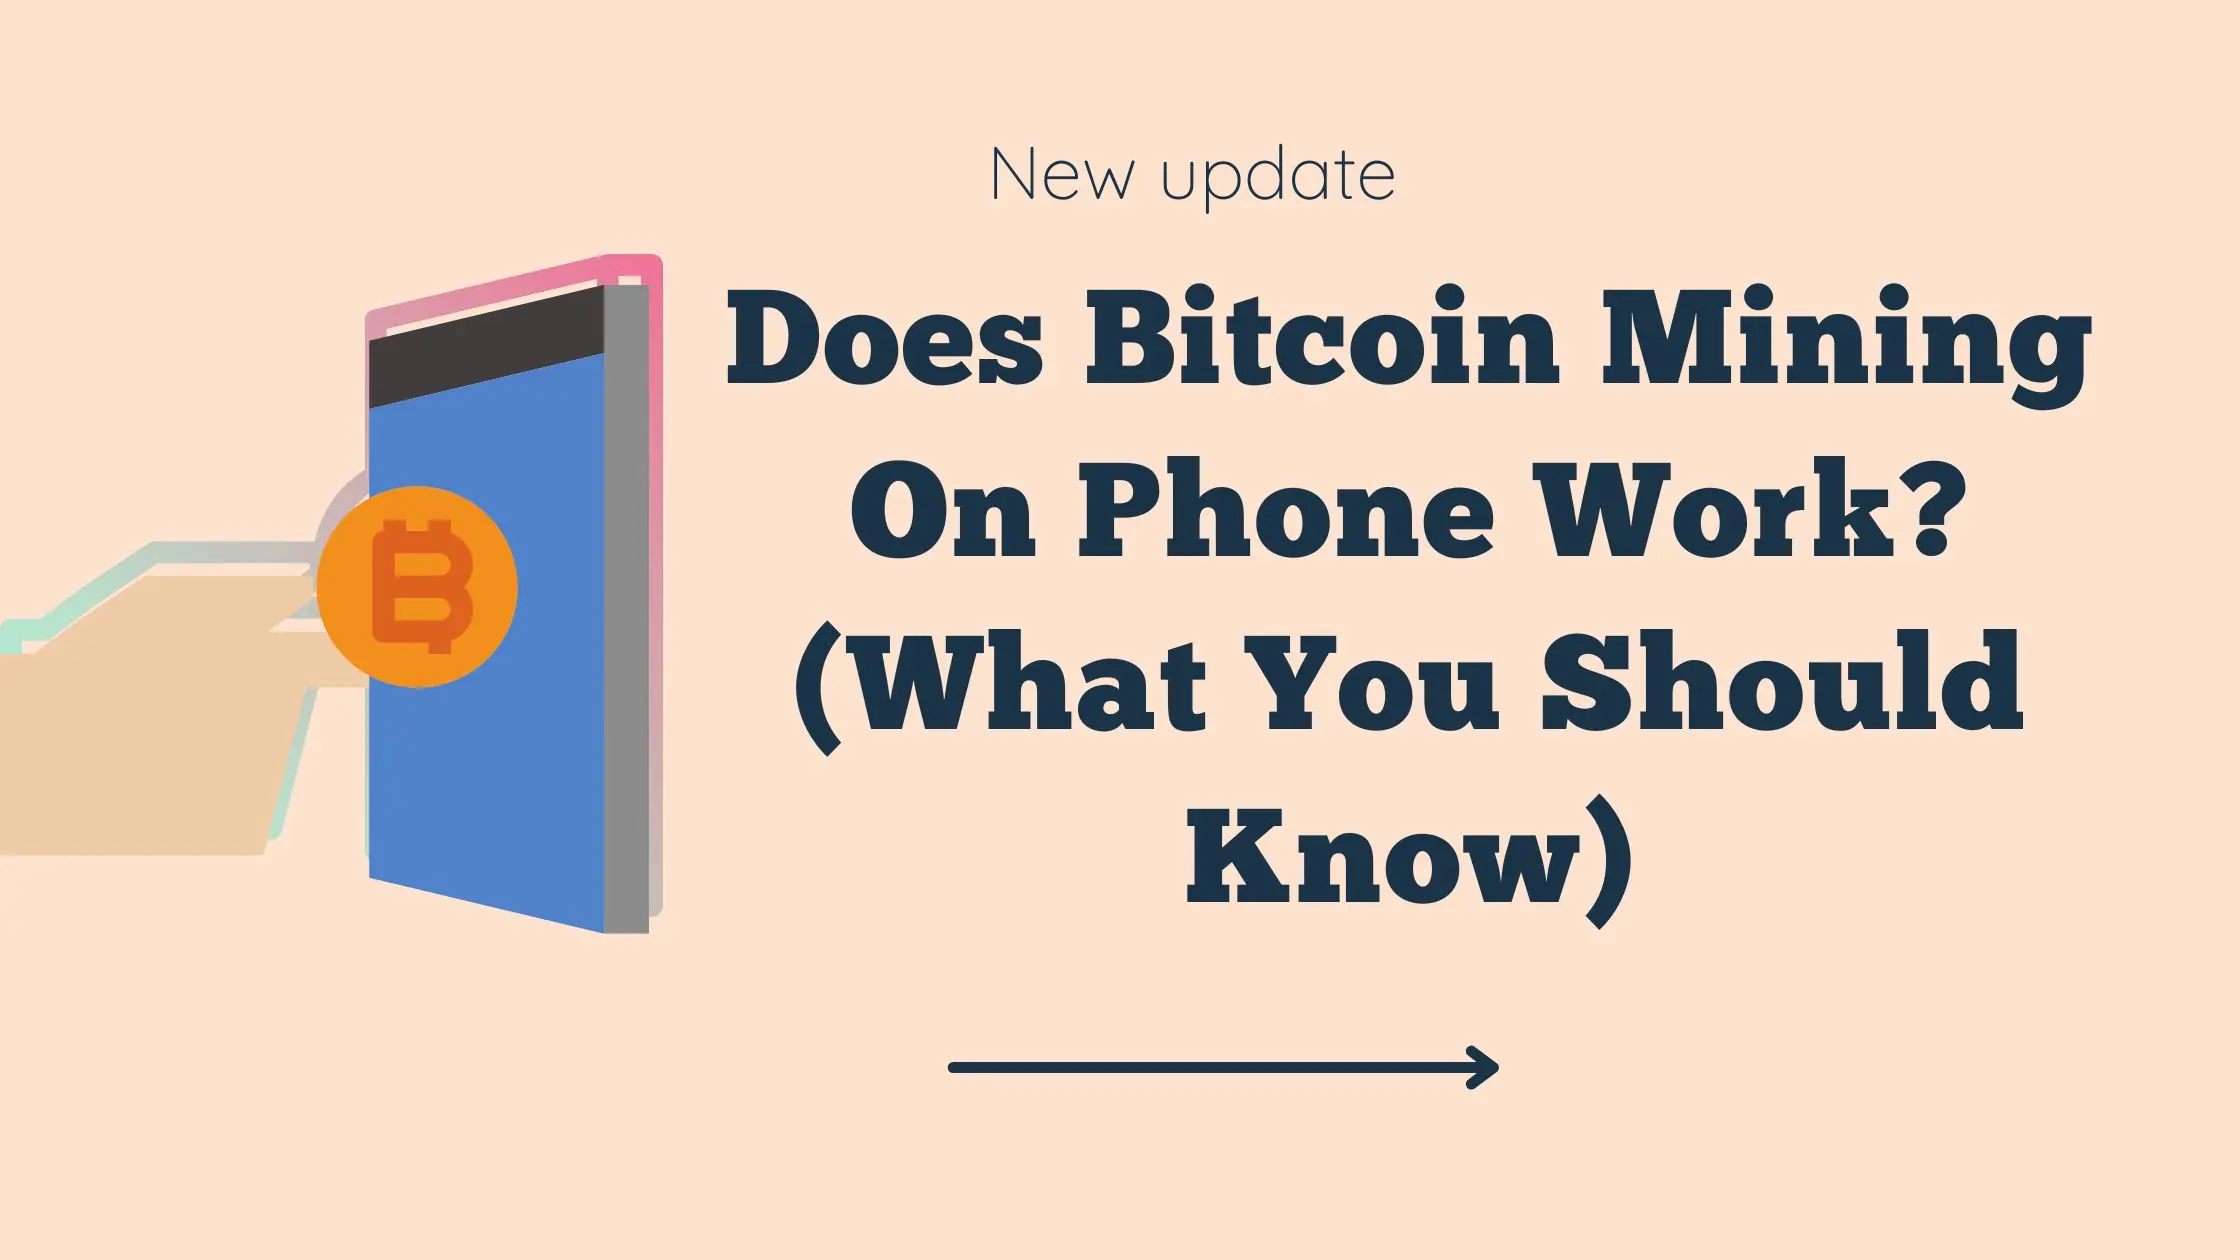 Does Bitcoin Mining On Phone Work? (What You Should Know)